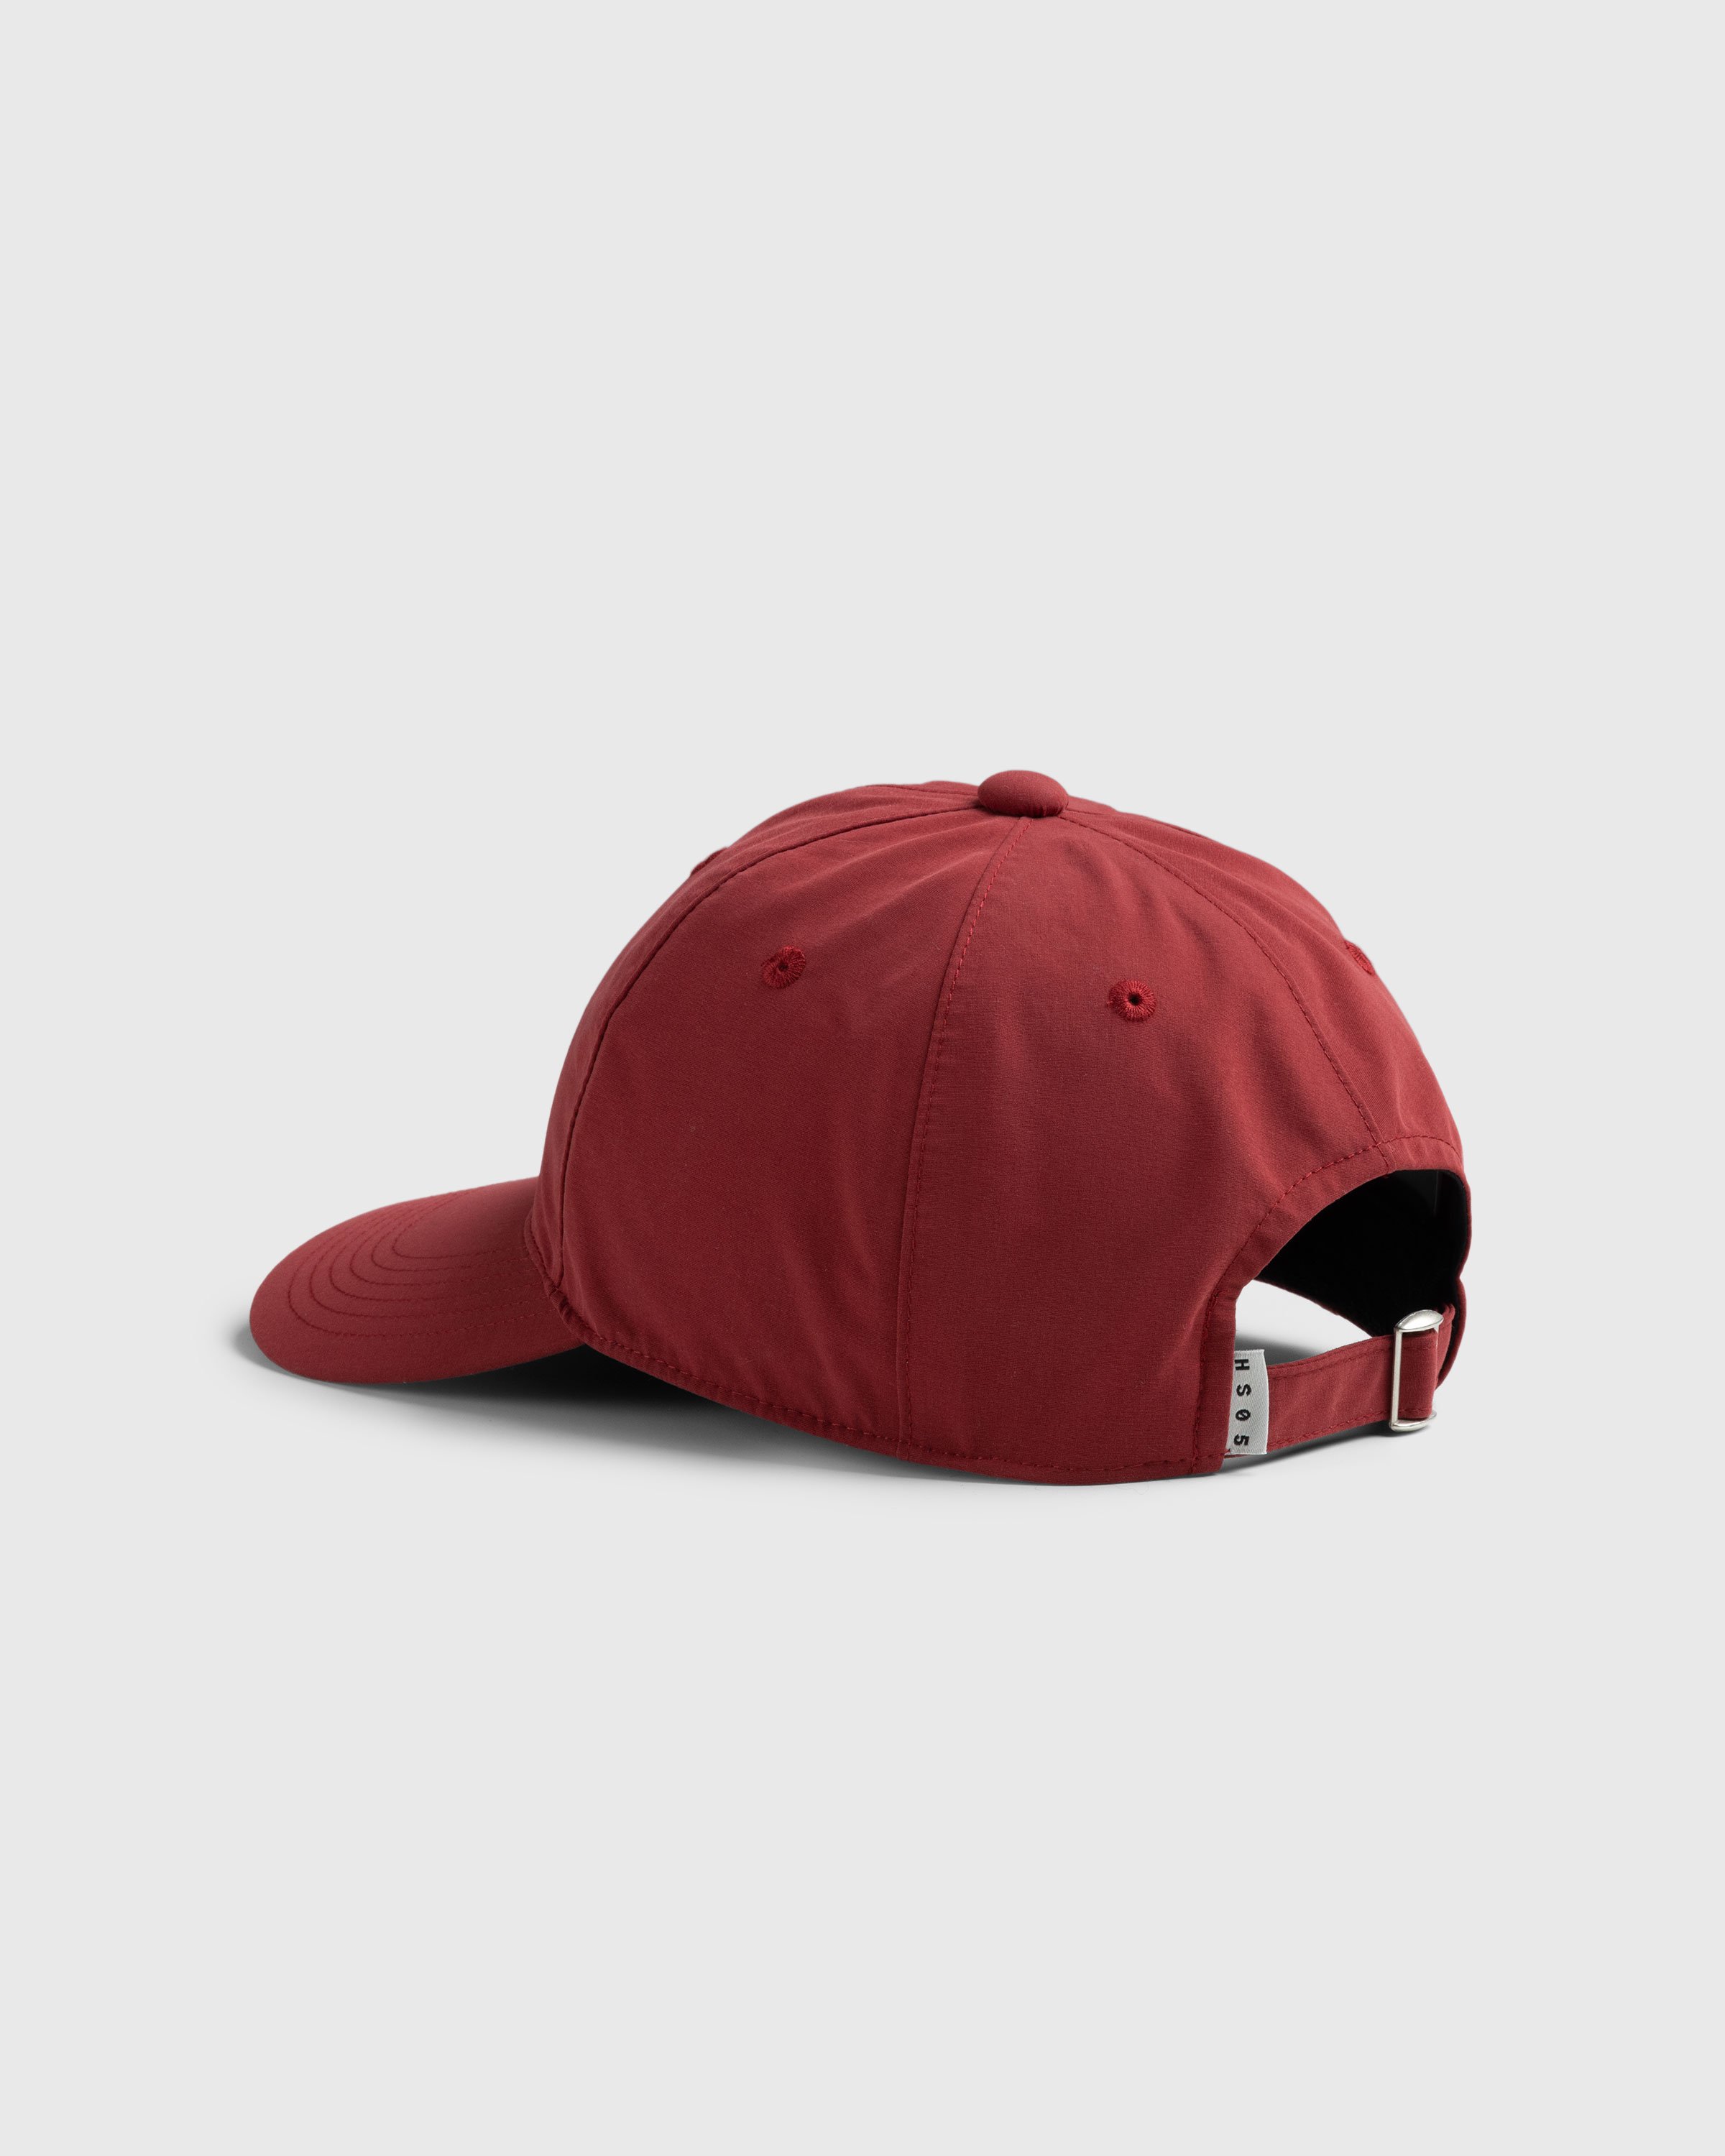 Highsnobiety HS05 - 3 Layer Taped Nylon Cap Red - Accessories - Red - Image 2